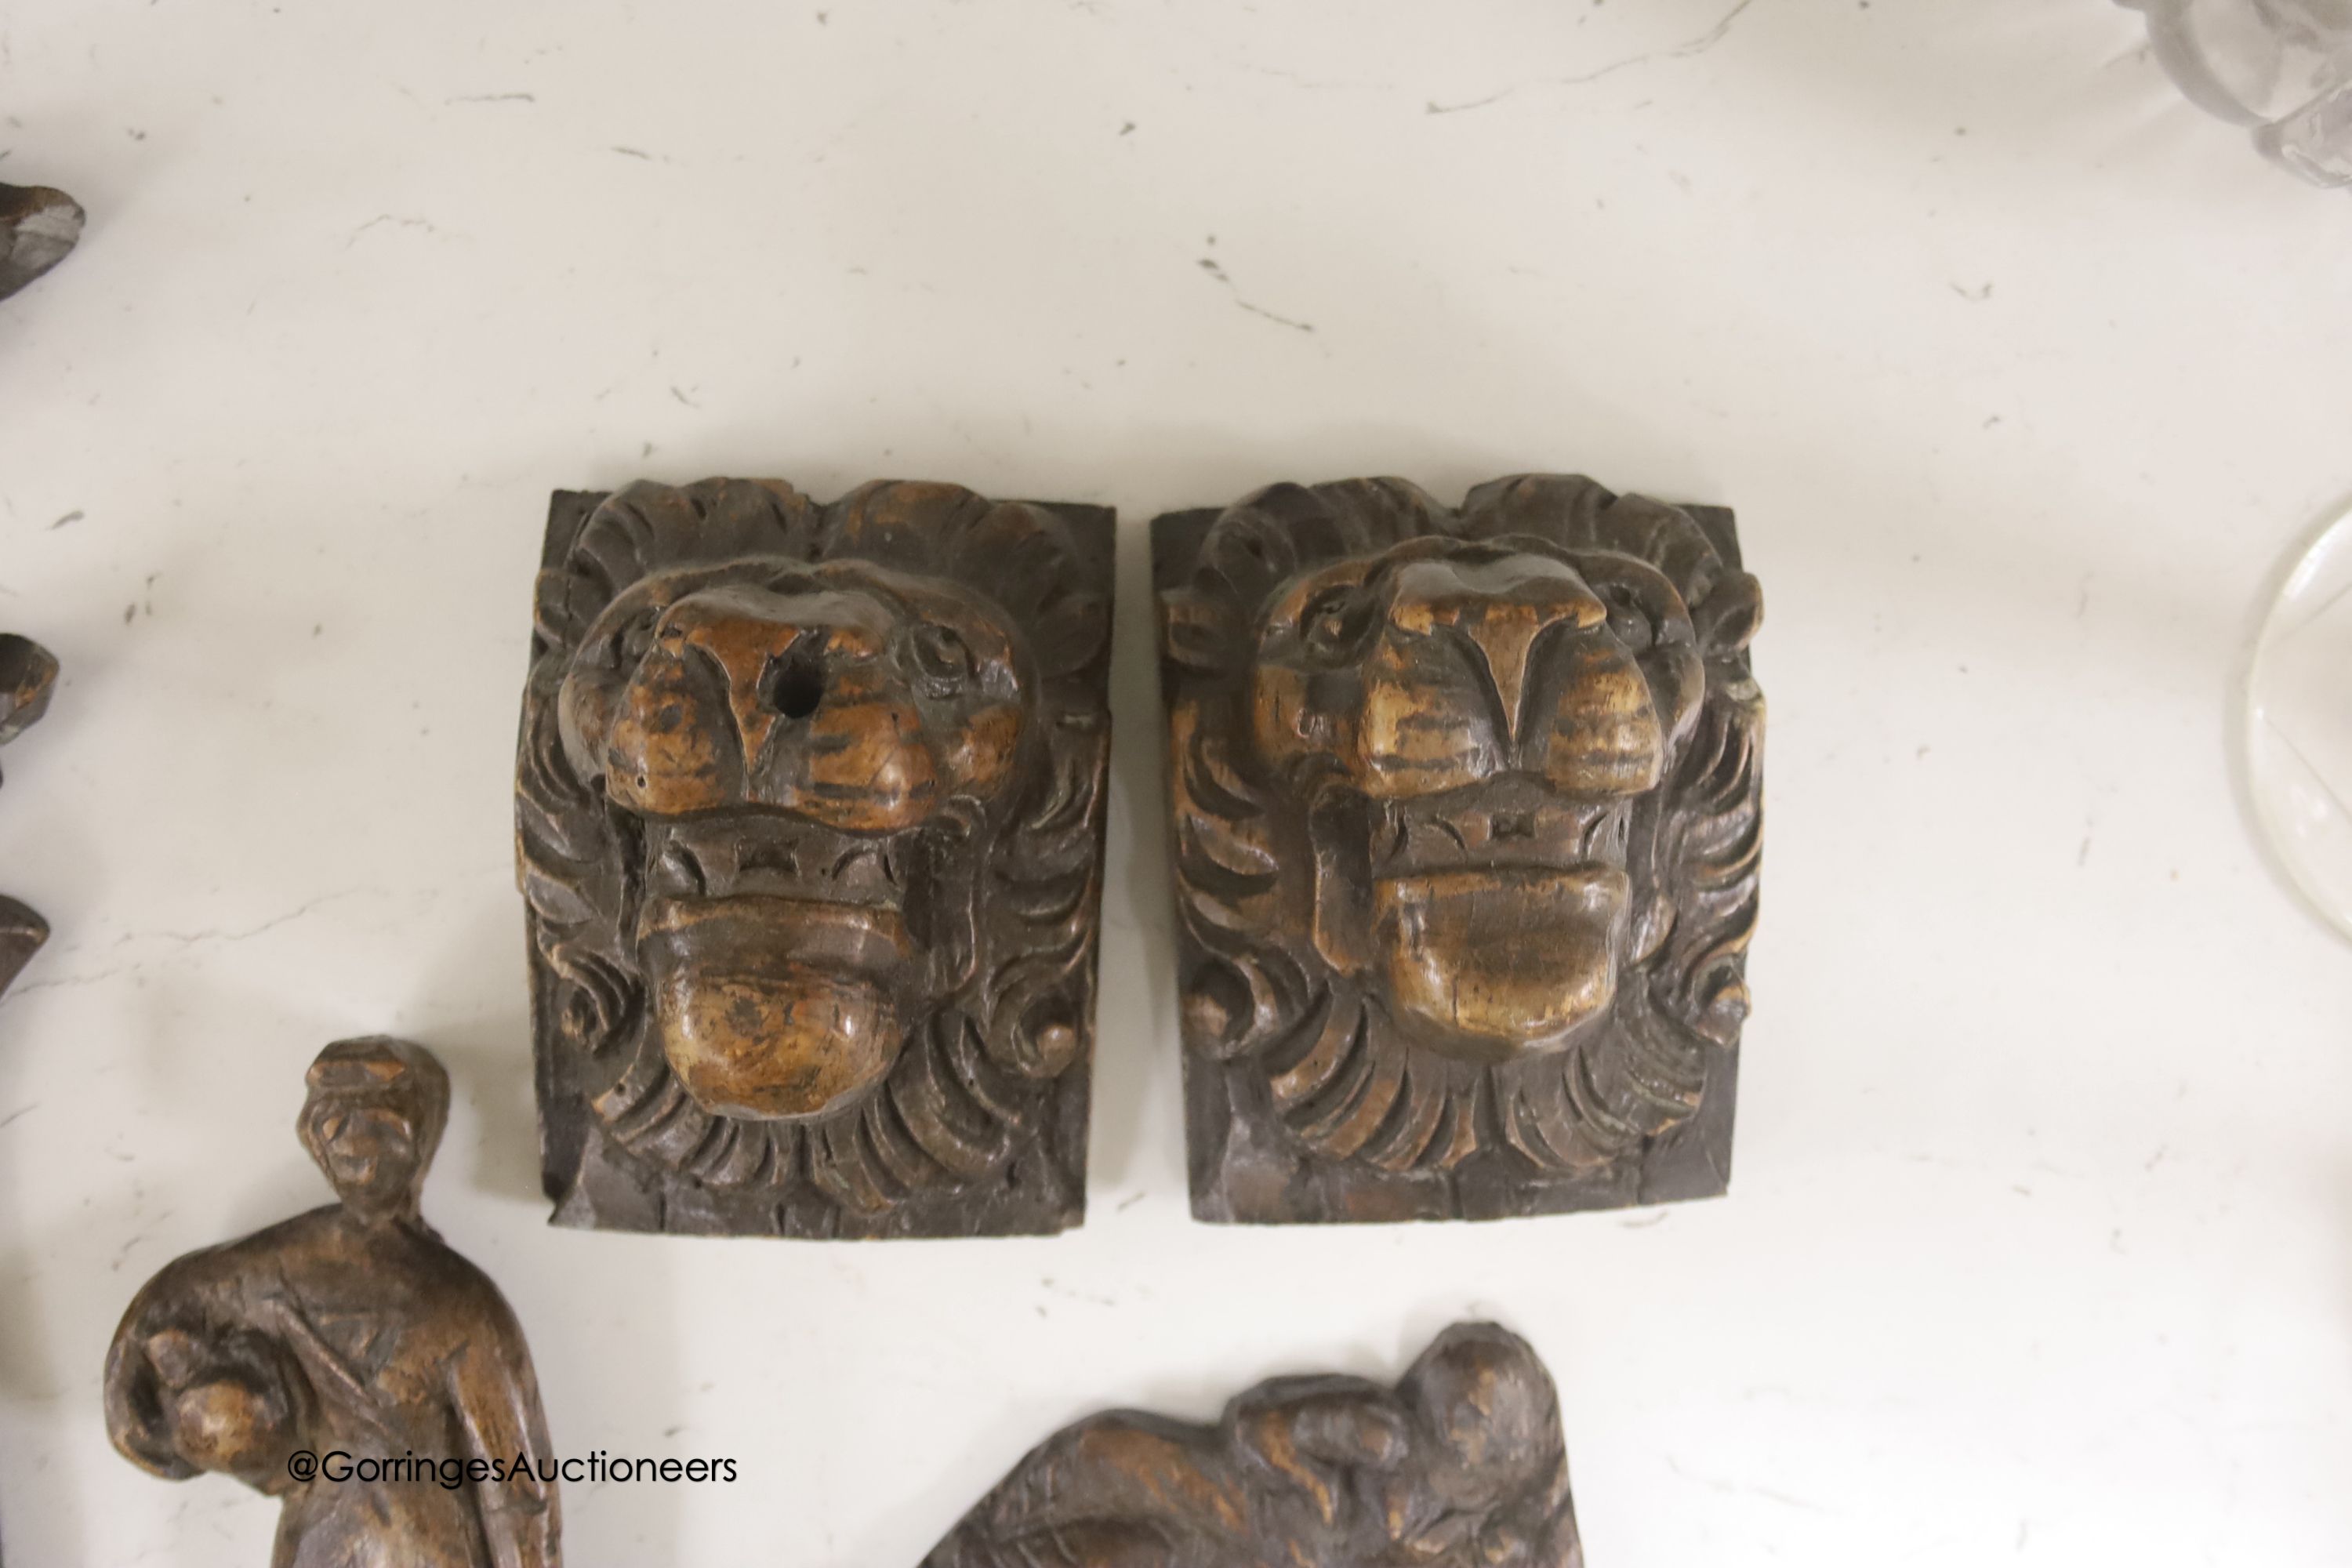 Seven 17th century or later carved oak fragments including a pair of lion masks